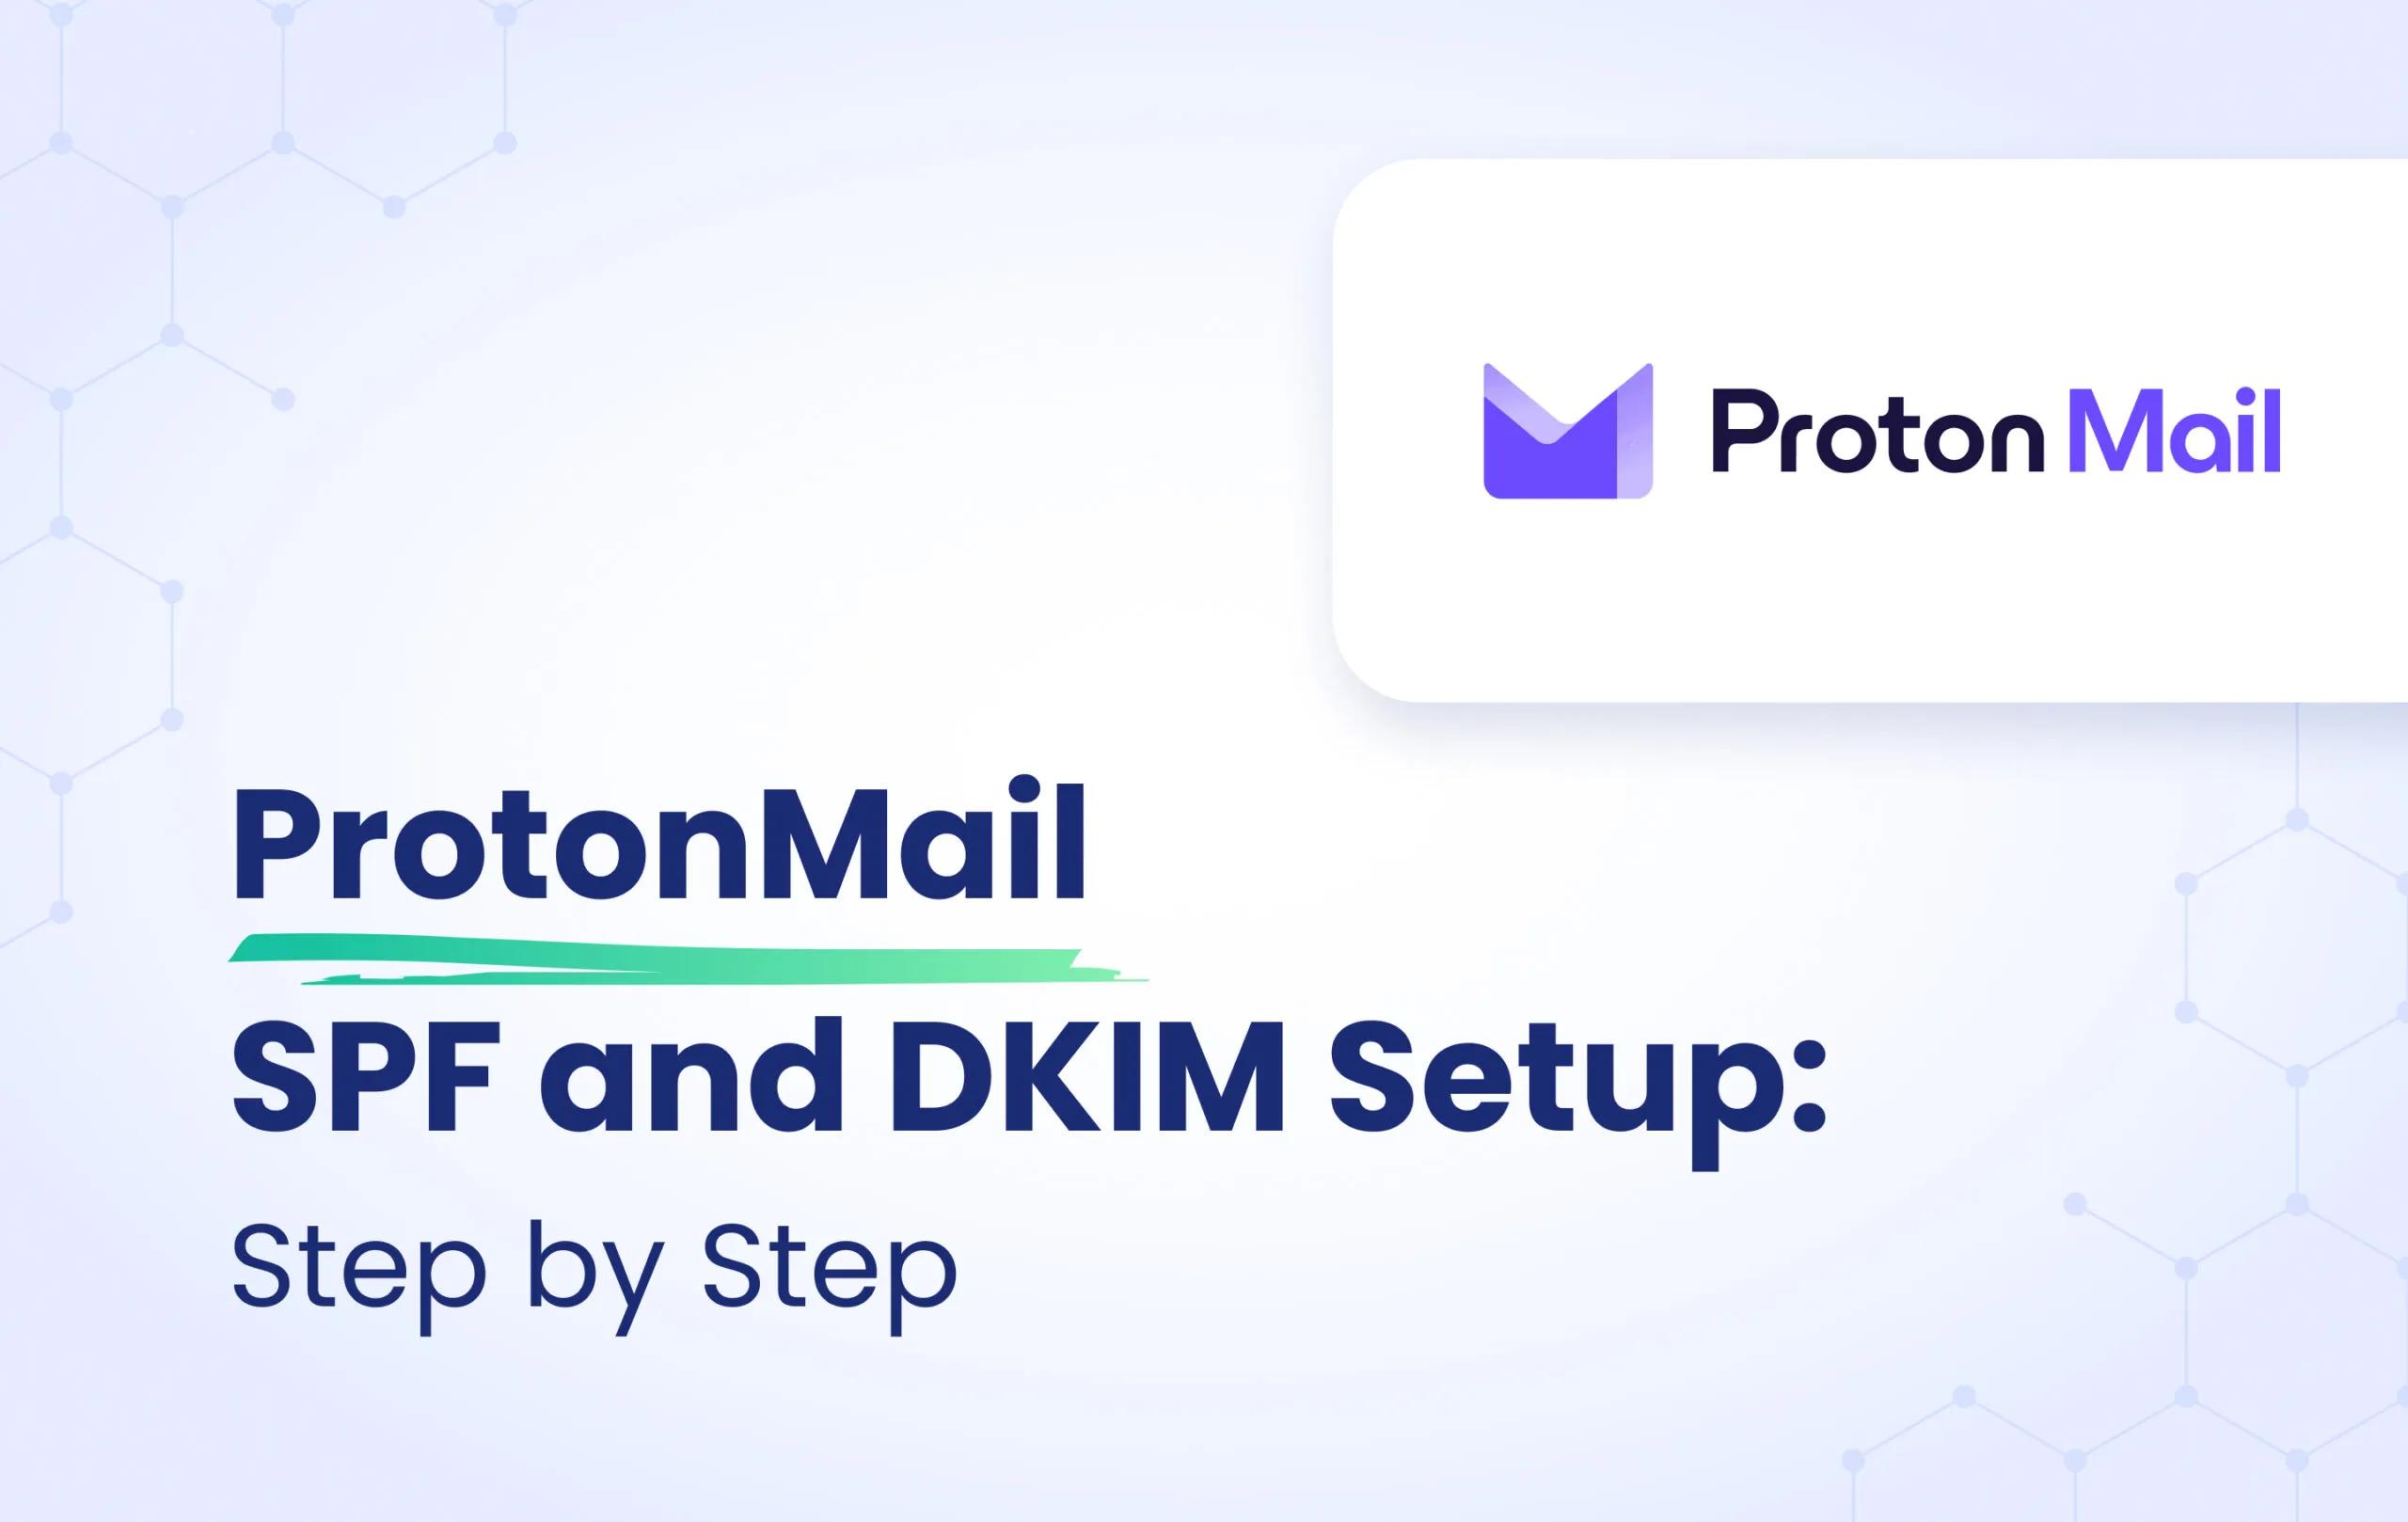 ProtonMail SPF and DKIM Configuration: Step-by-Step featured image